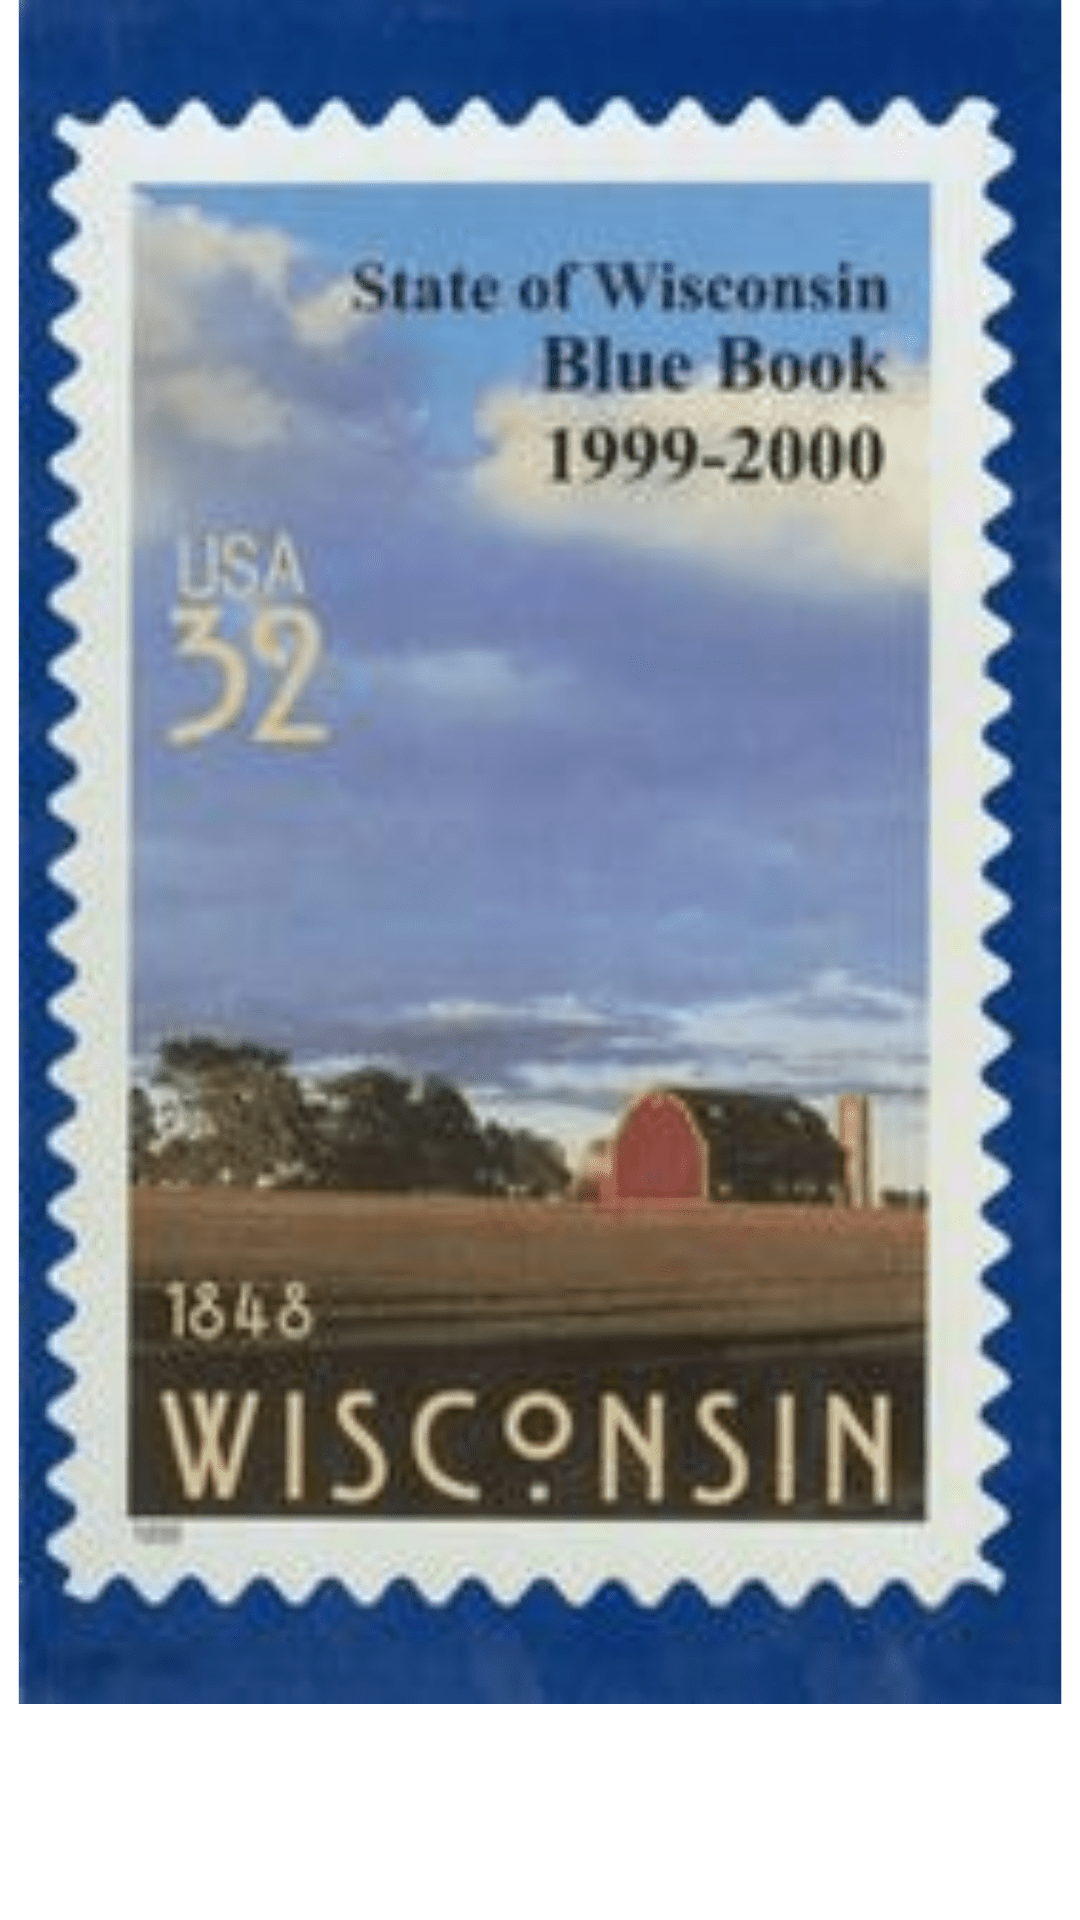 State of Wisconsin Blue Book 1999-2000